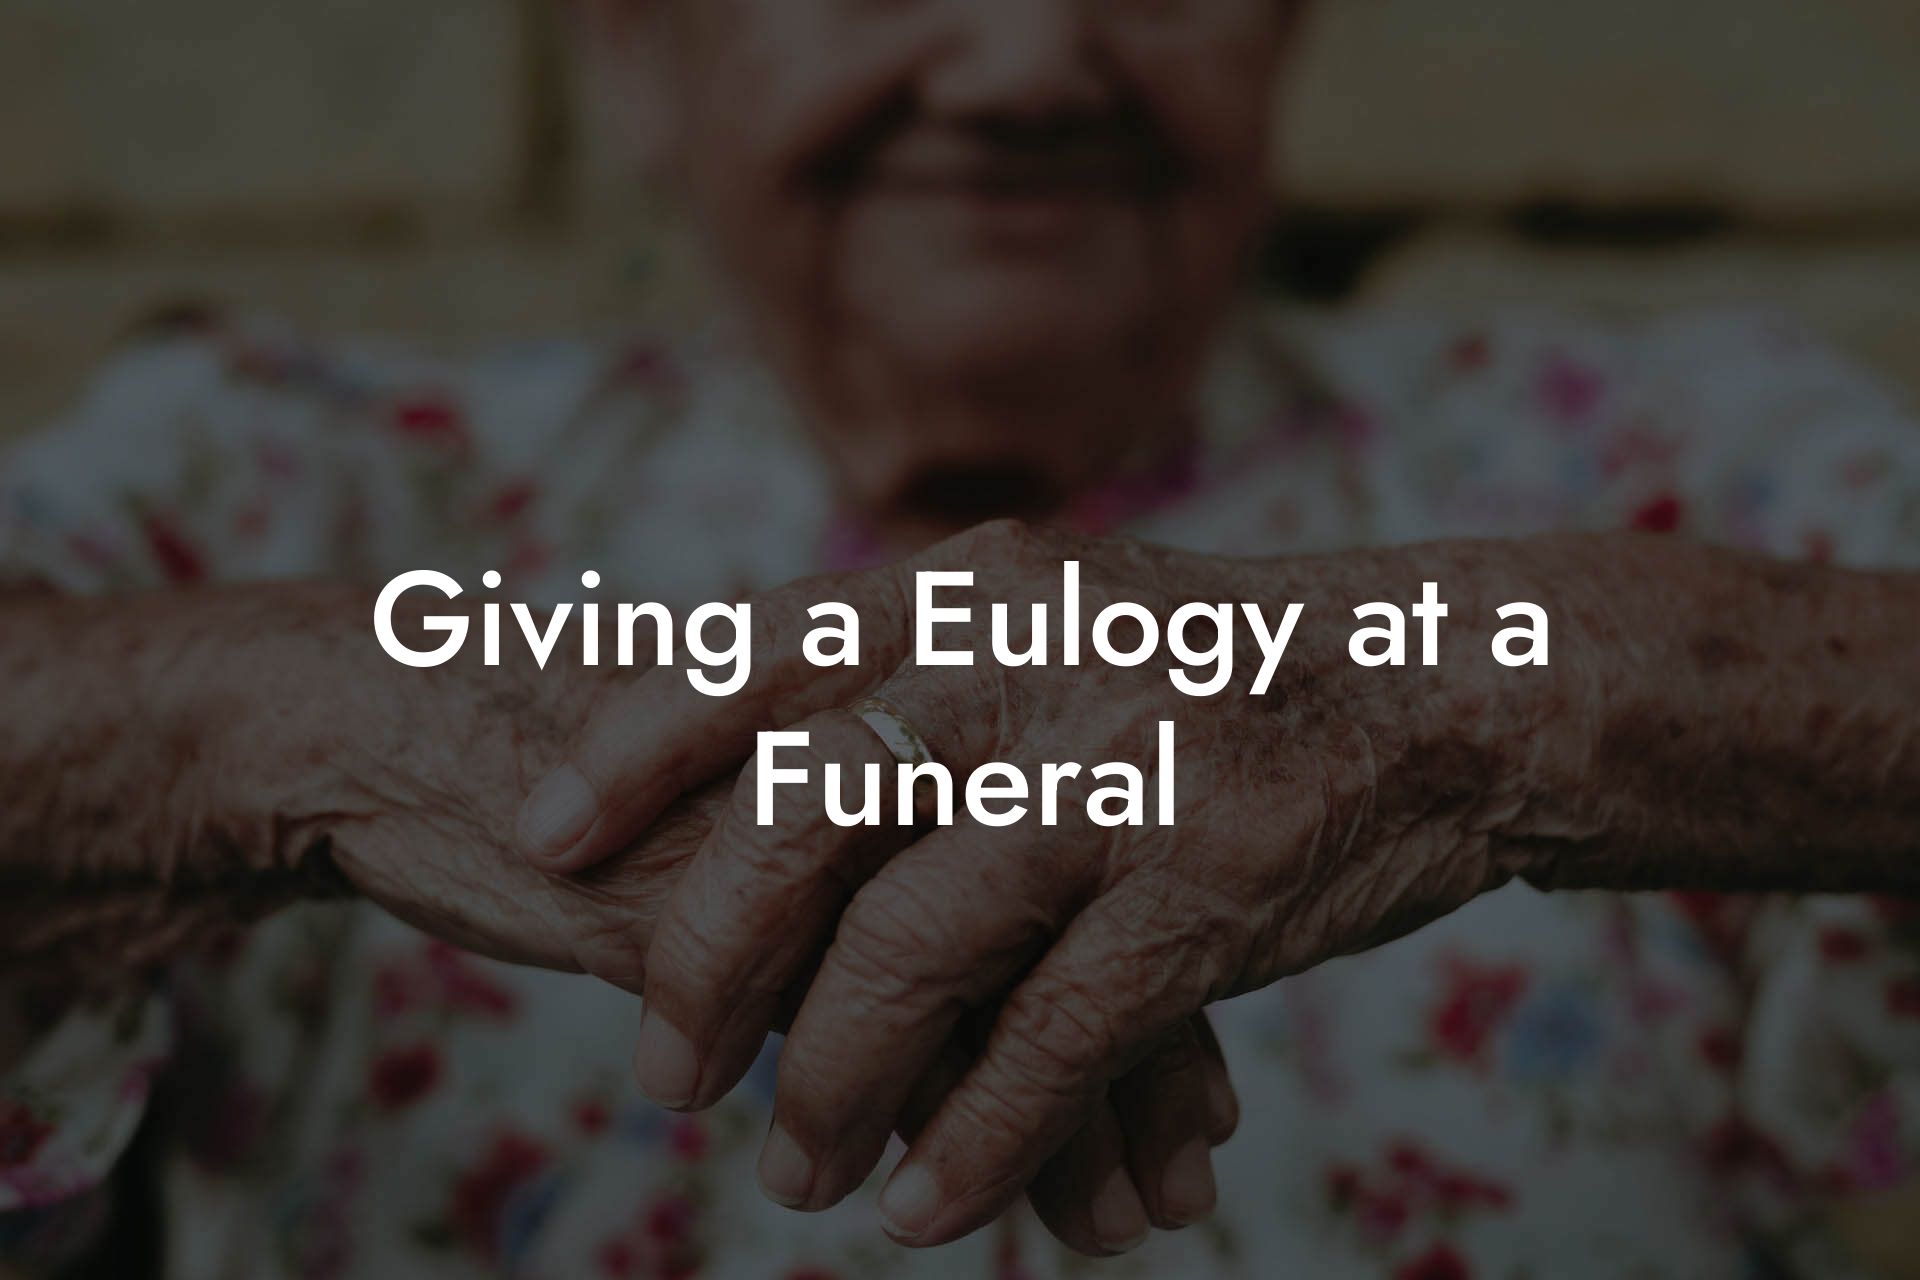 Giving a Eulogy at a Funeral